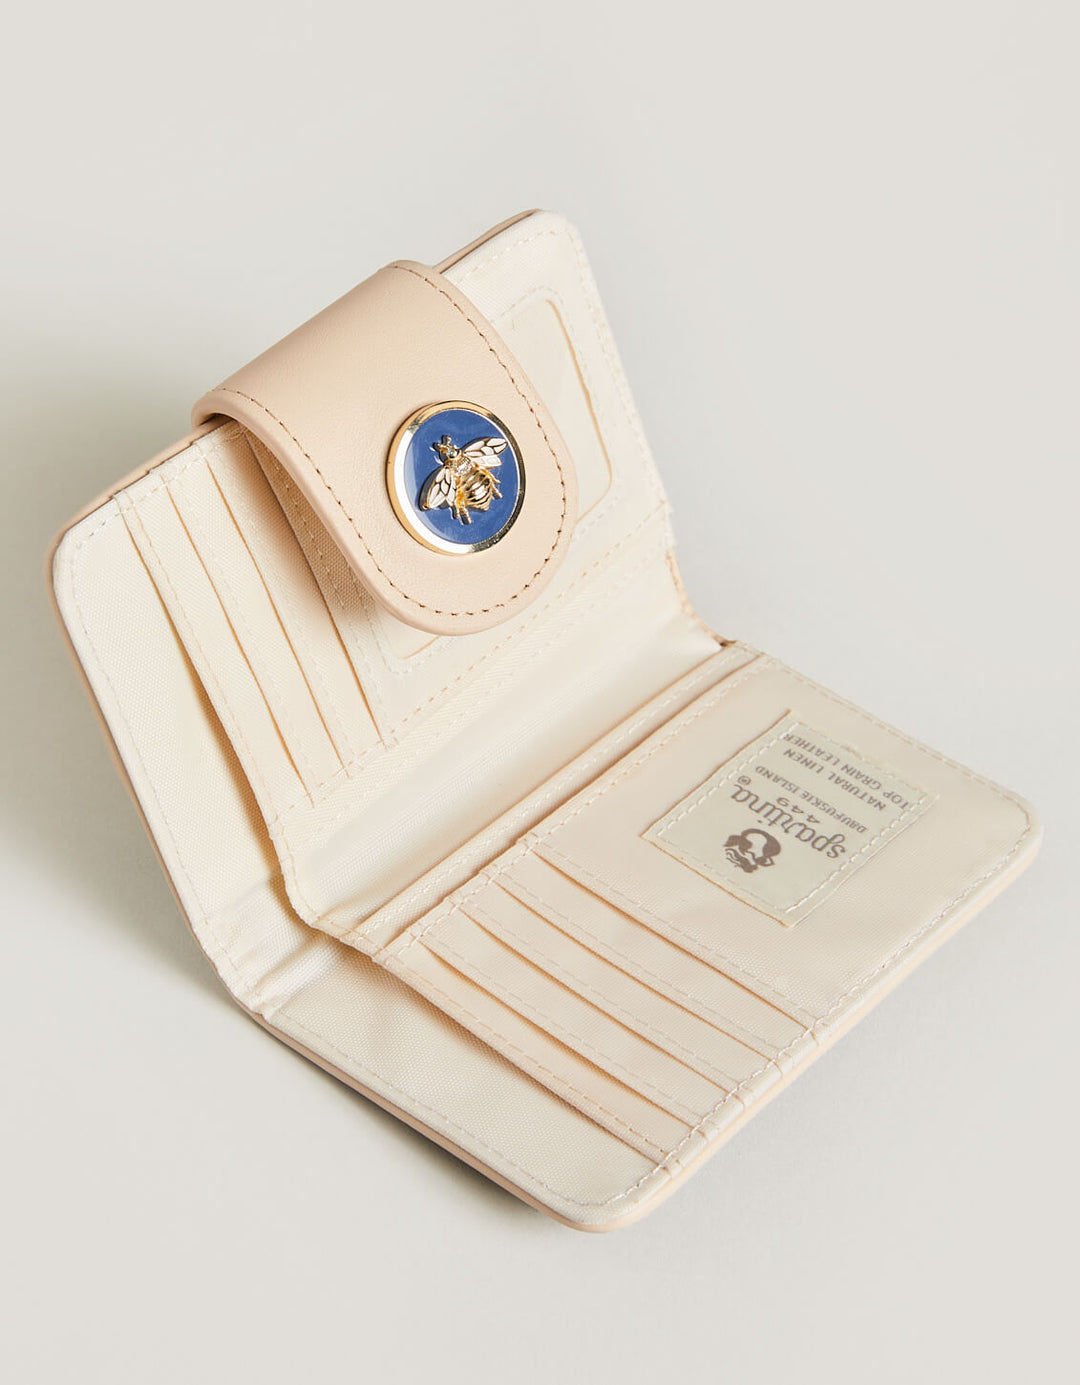 spartina yacht club mini wallet peeples song